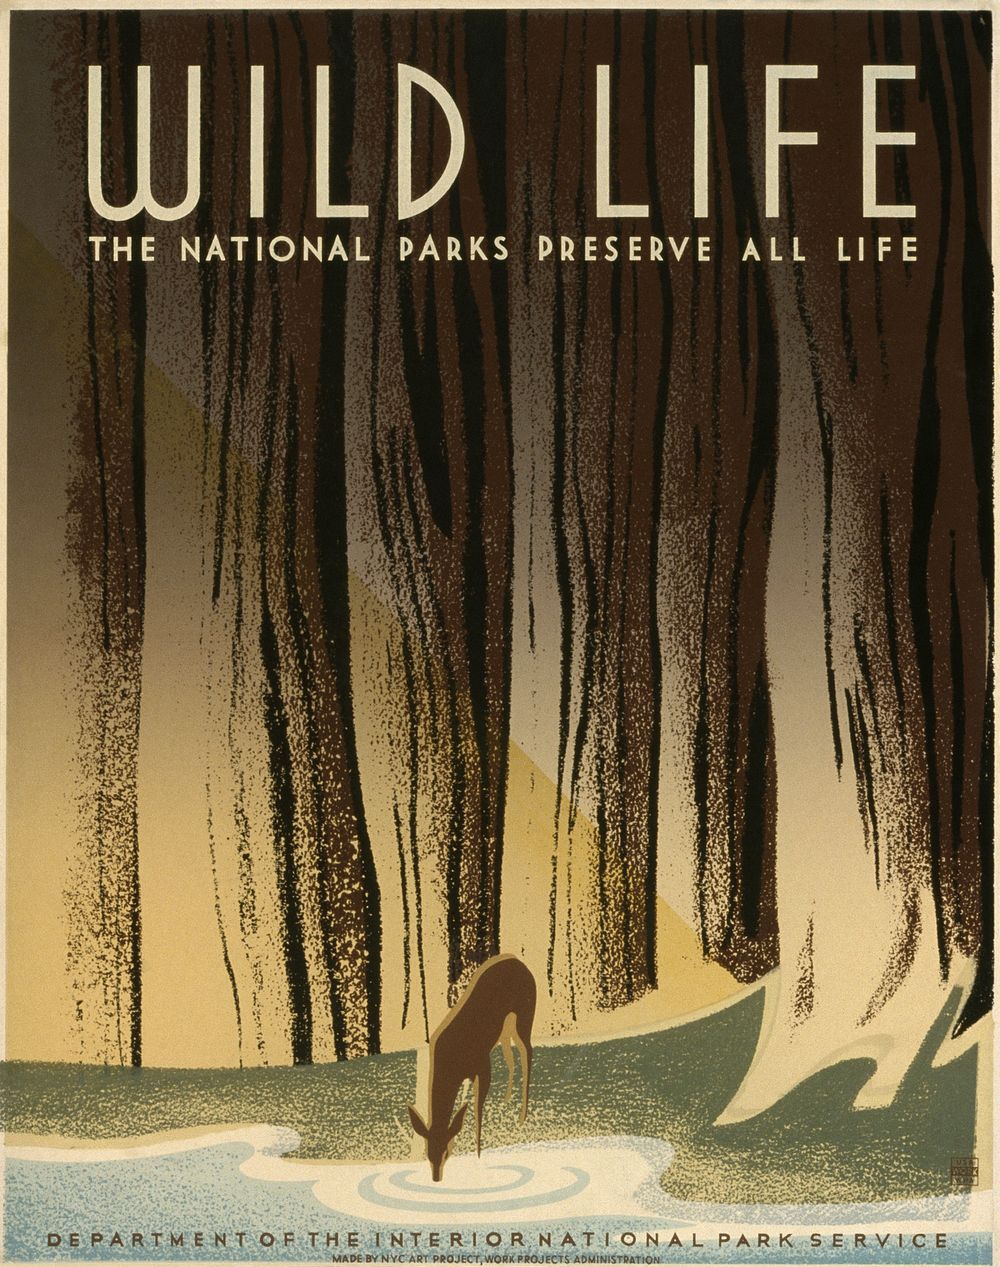 "Wild life The national parks preserve all life." Poster for United States National Park Service, showing a deer drinking…